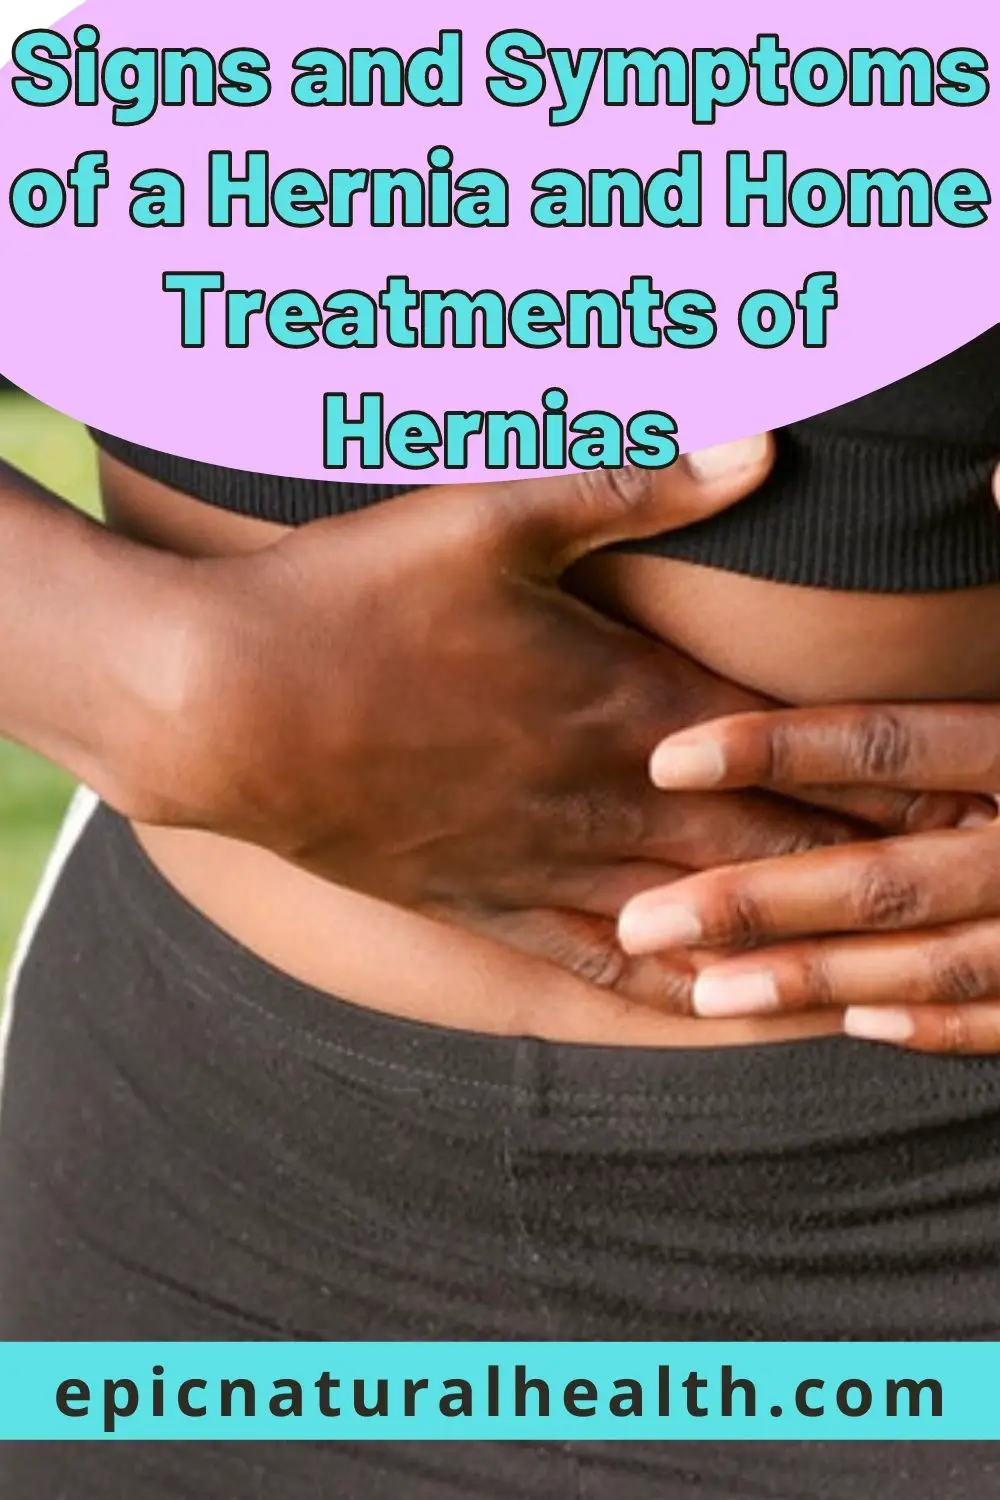 Signs and Symptoms of a Hernia and Home Treatments of Hernias PIN